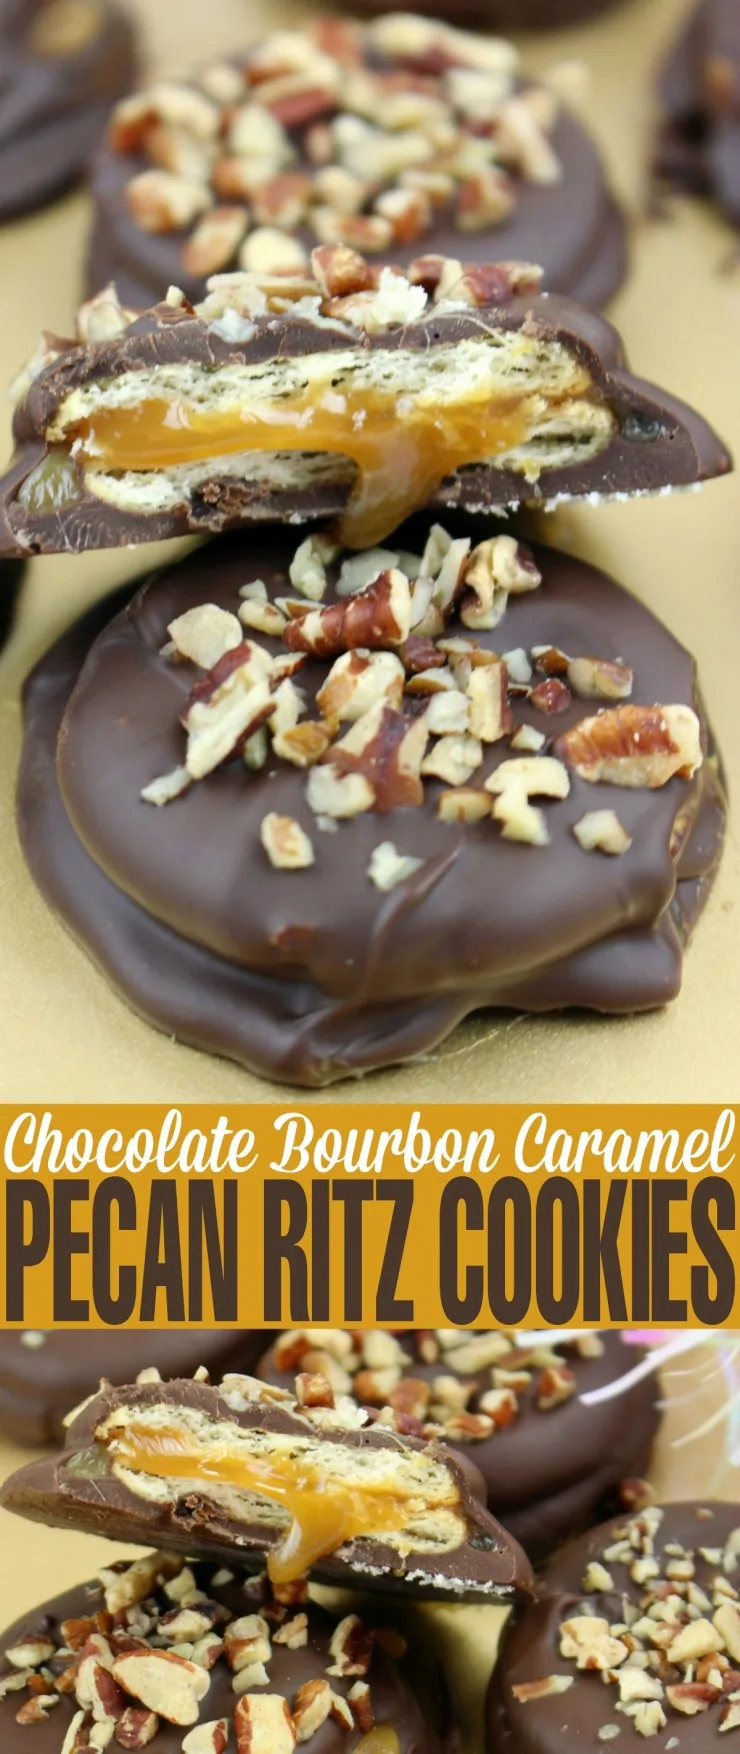 These Chocolate Bourbon Caramel Pecan Ritz Cookies are basically boozy turtle cookies with soft, creamy caramel enrobed in chocolate. 